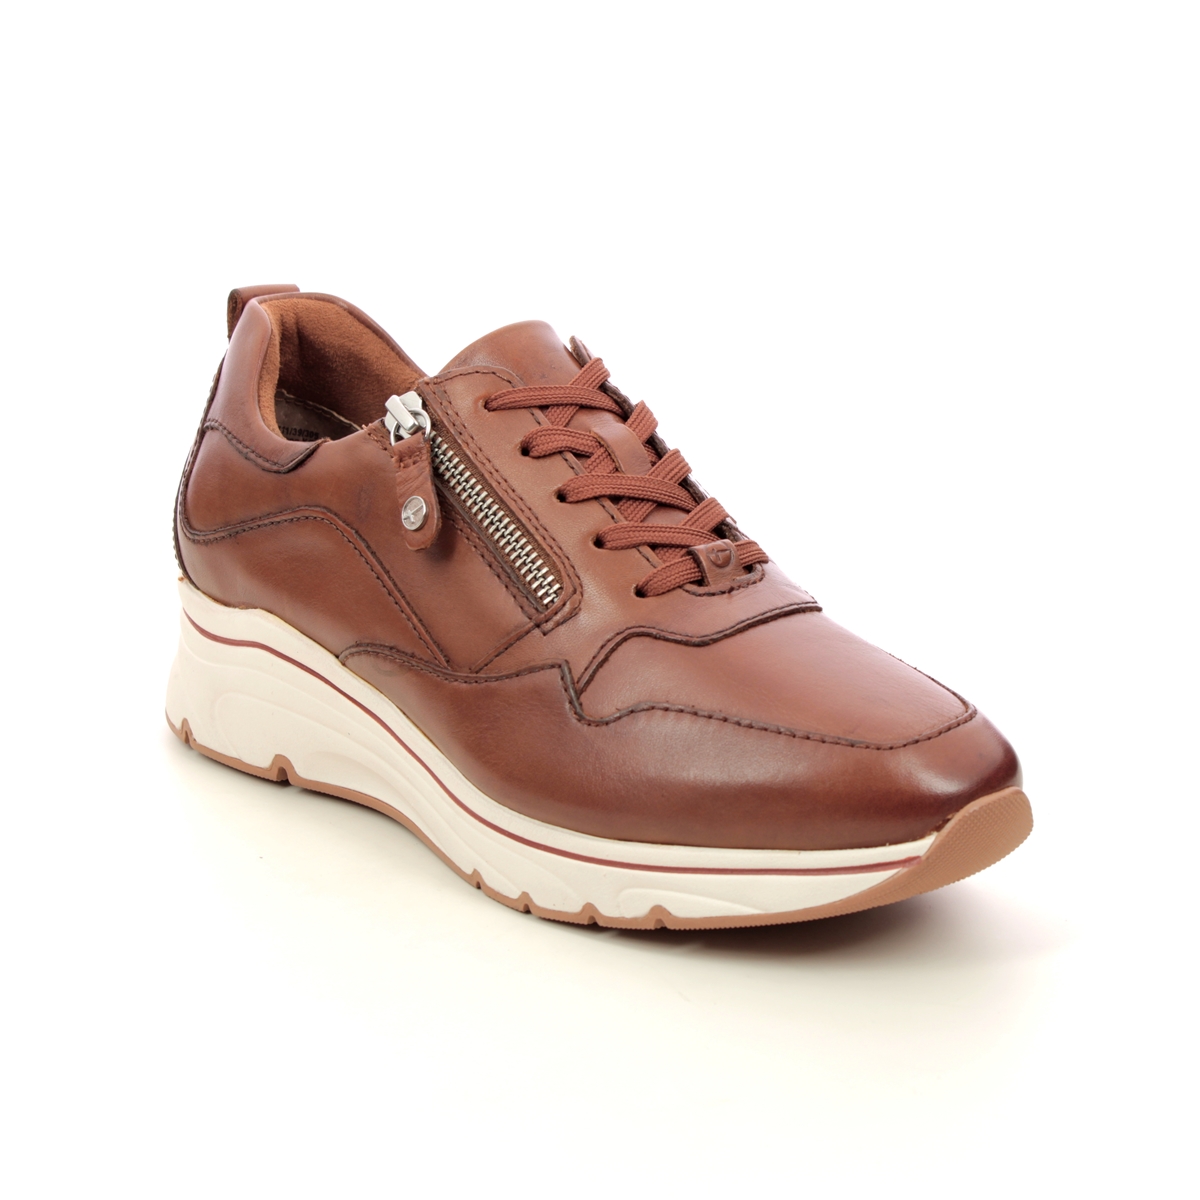 Tamaris Vinnie Tan Leather  Womens Trainers 23711-39-305 In Size 40 In Plain Tan Leather